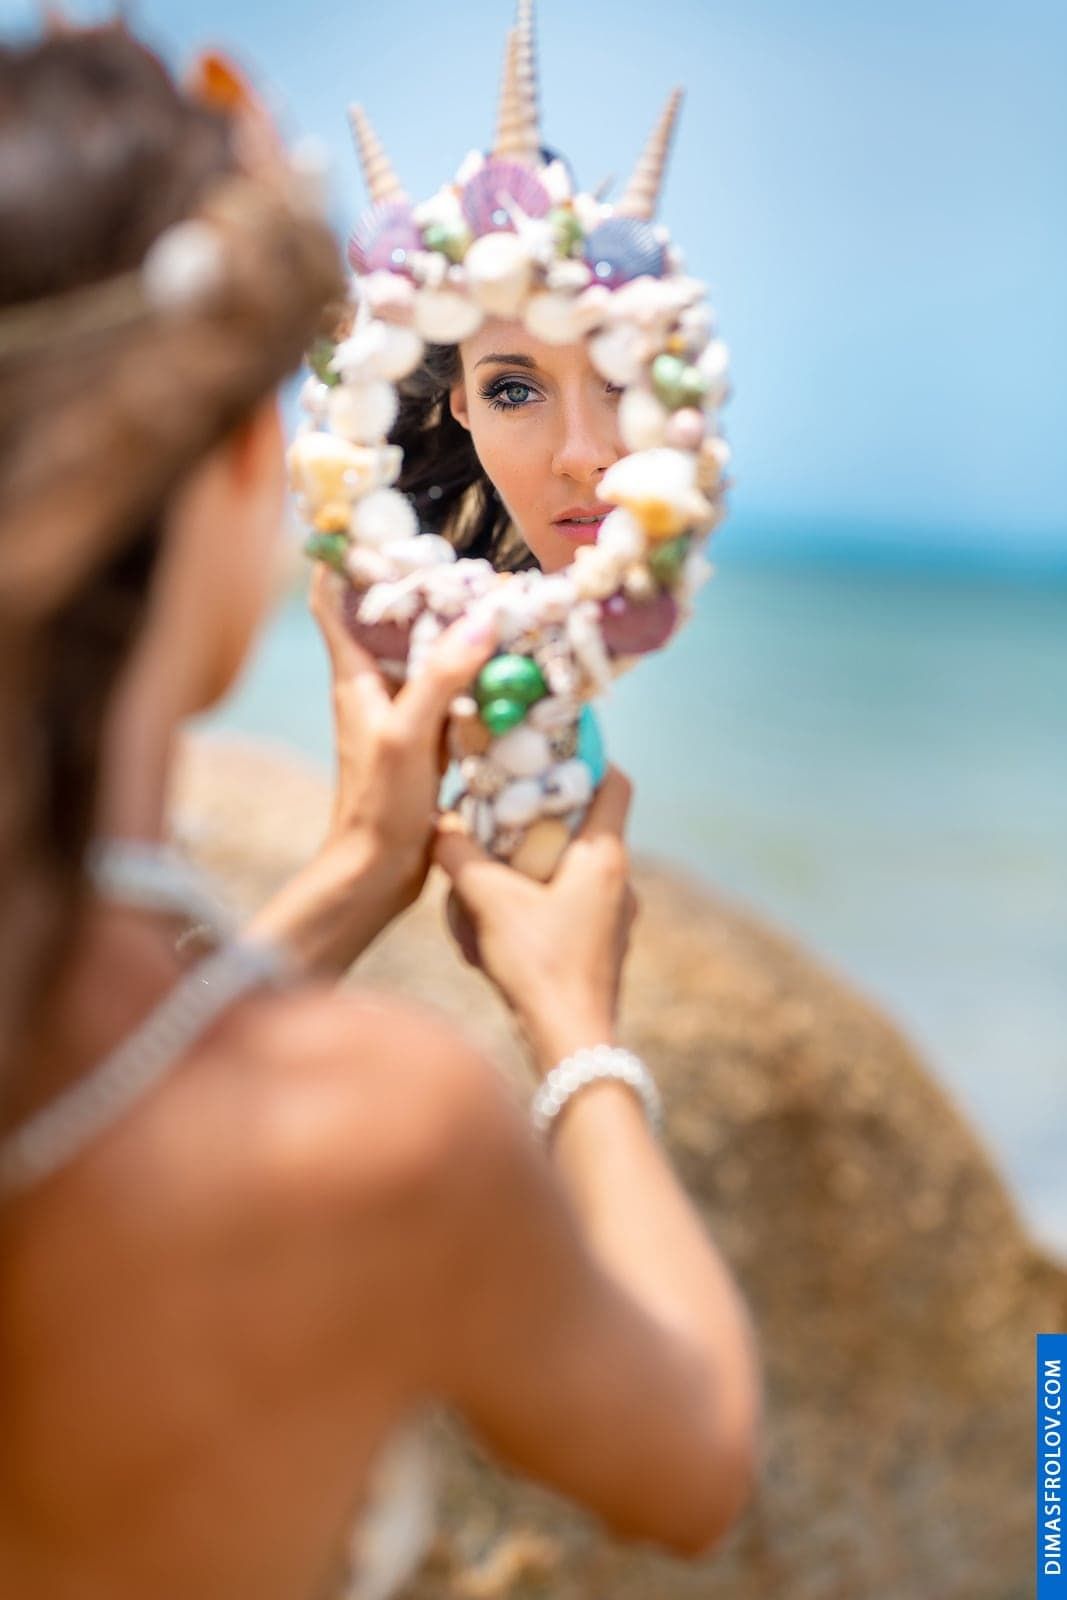 Unique shell accessories for a themed photo shoot on Koh Samui. photographer Dimas Frolov. photo1635